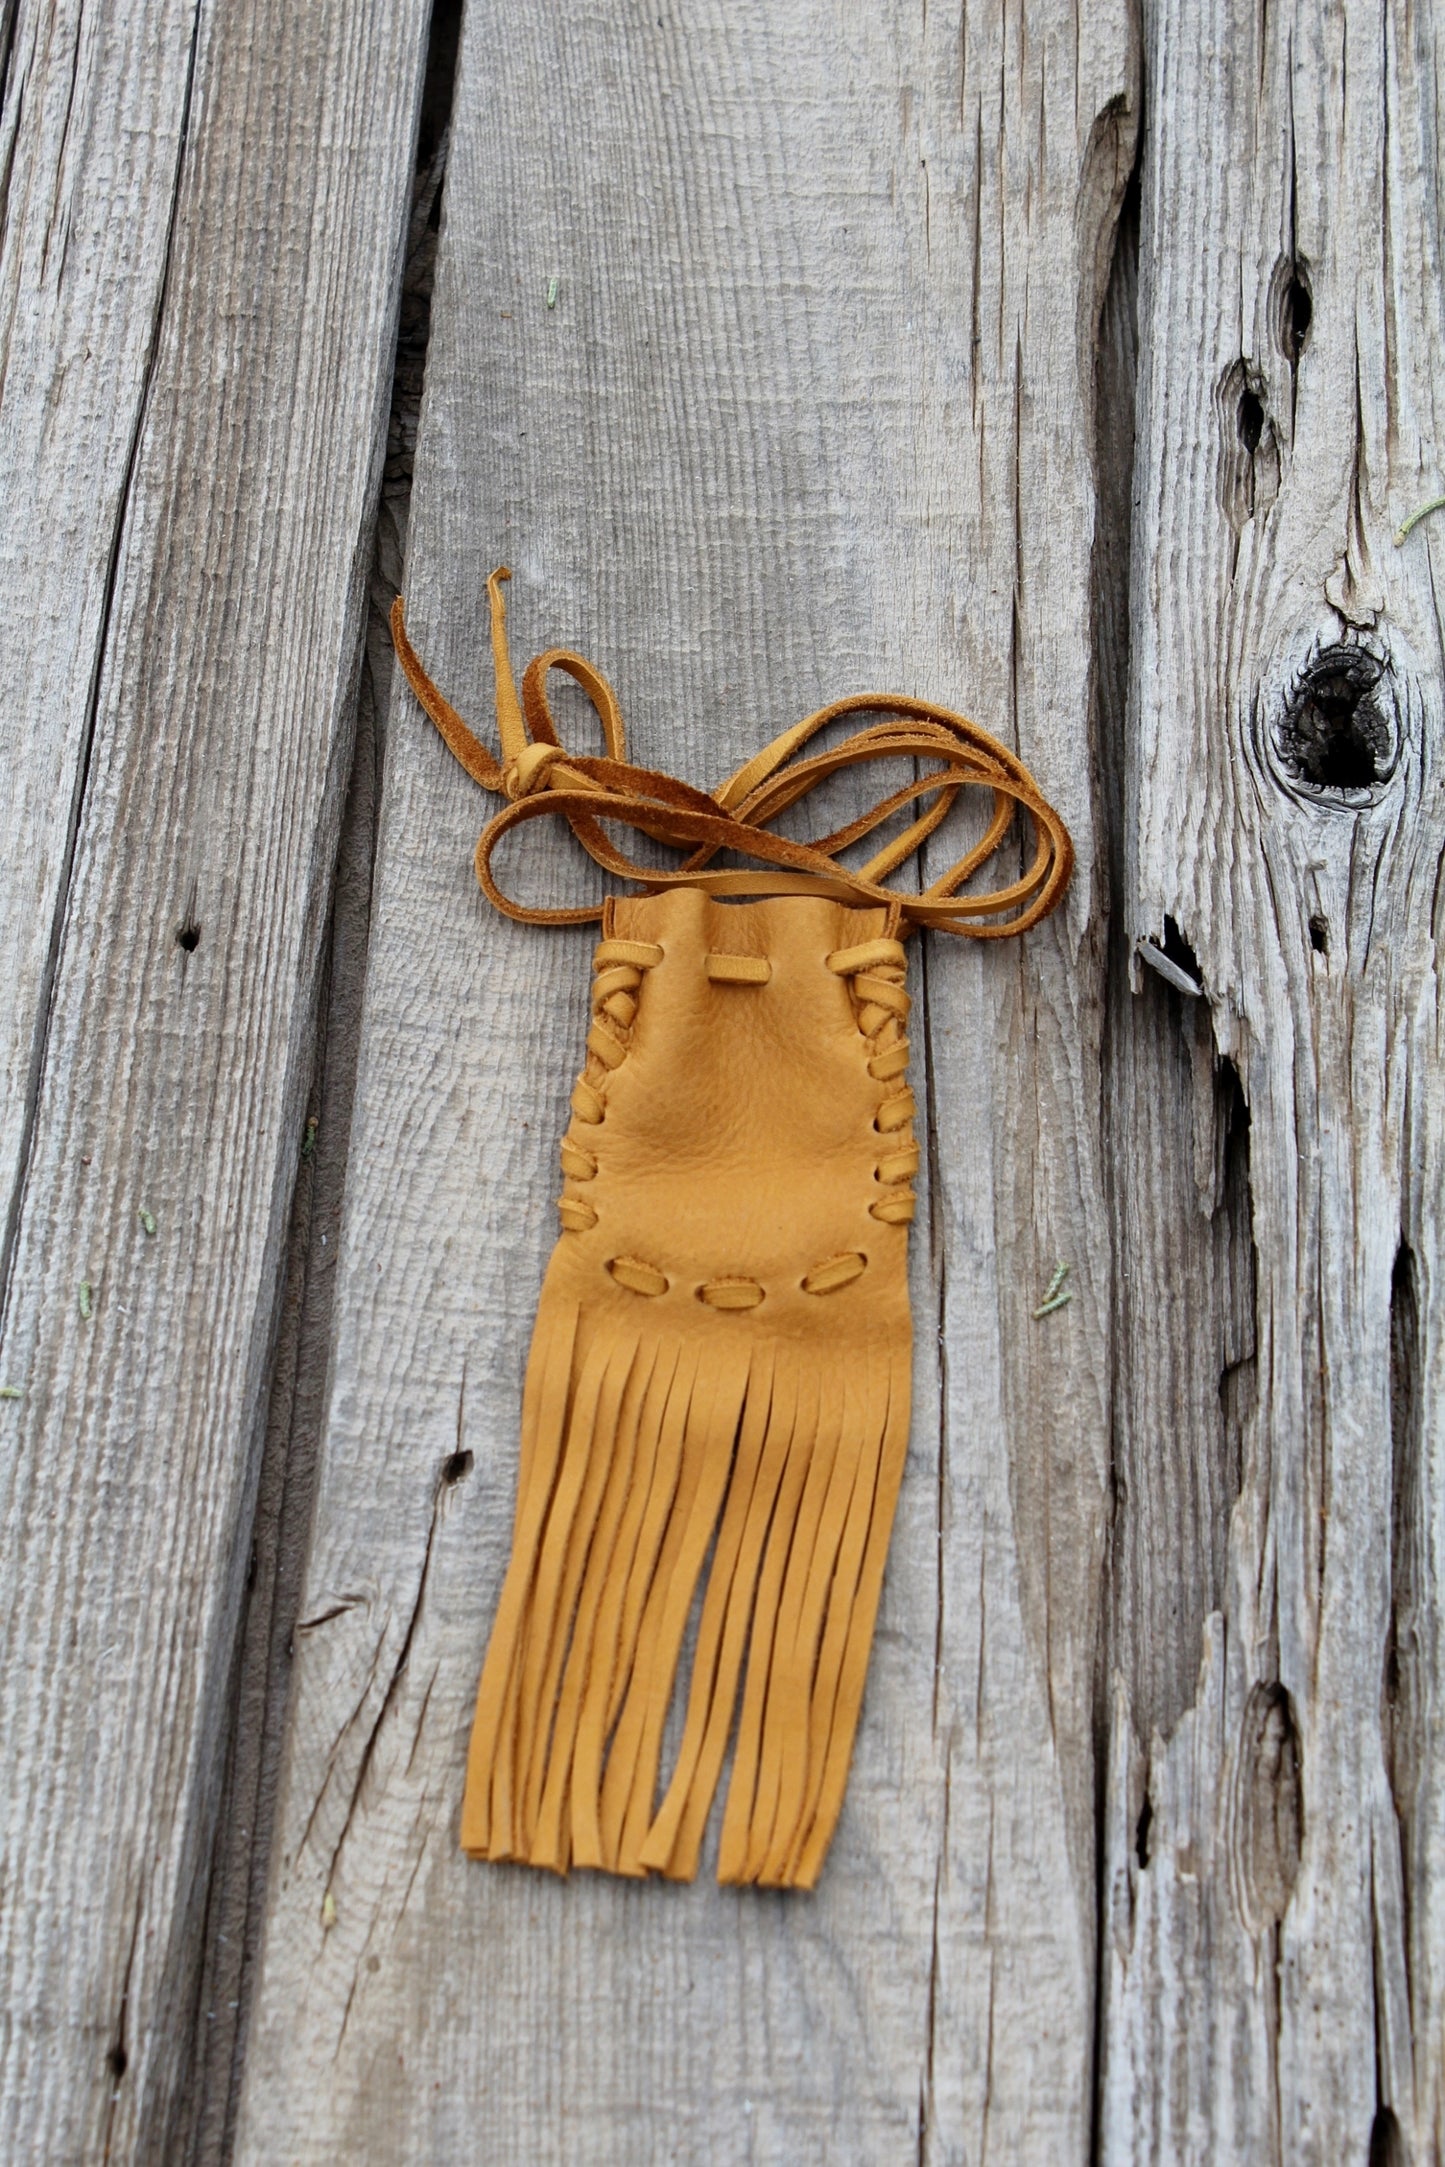 Fringed leather medicine bag, necklace amulet pouch